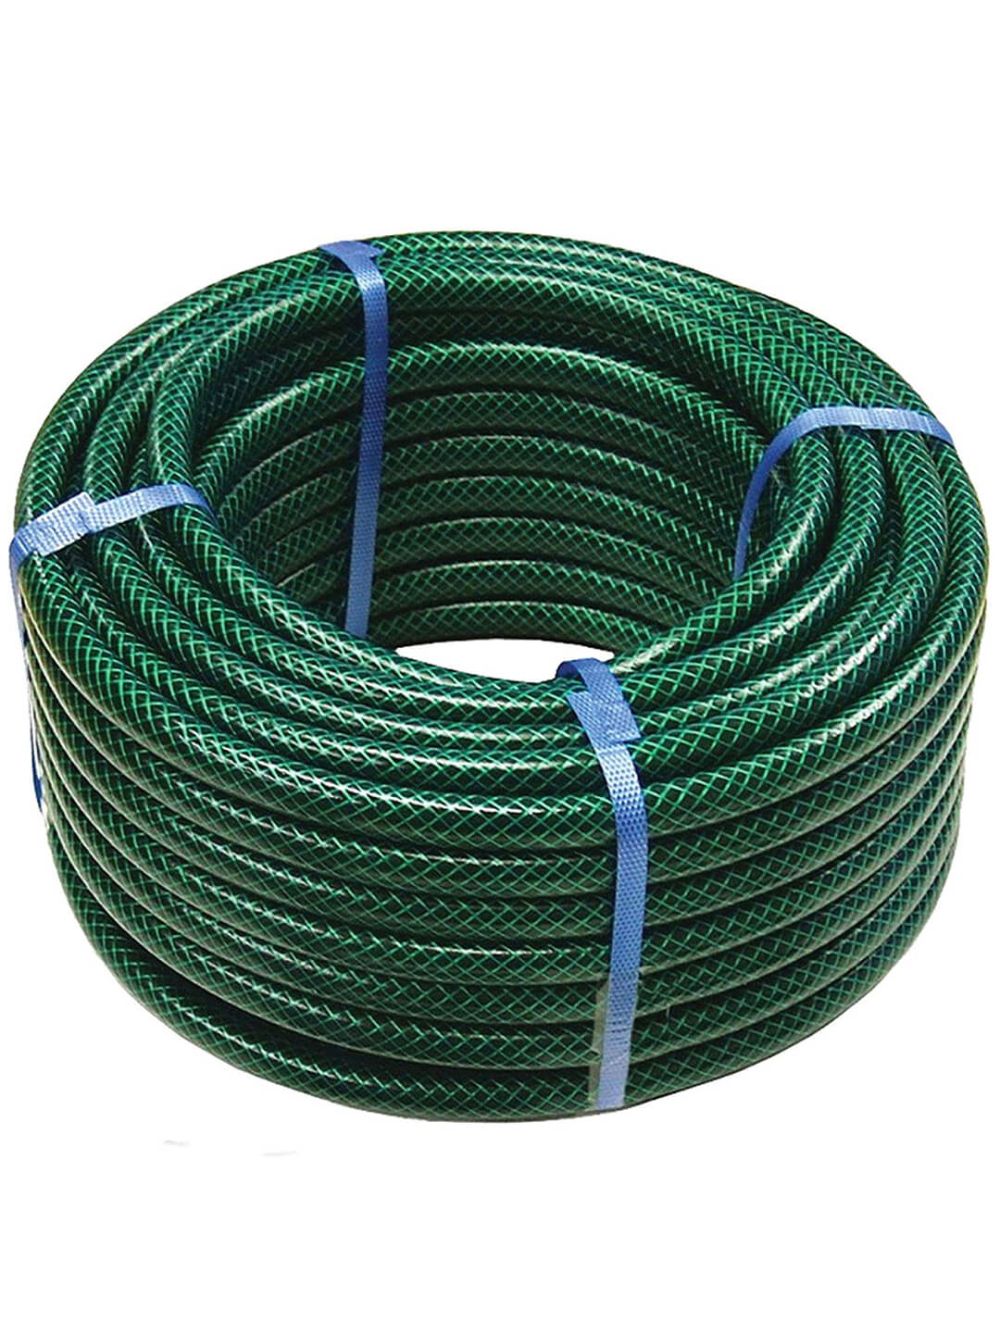 TREGER GREEN 30M BRAIDED HOSE PIPE